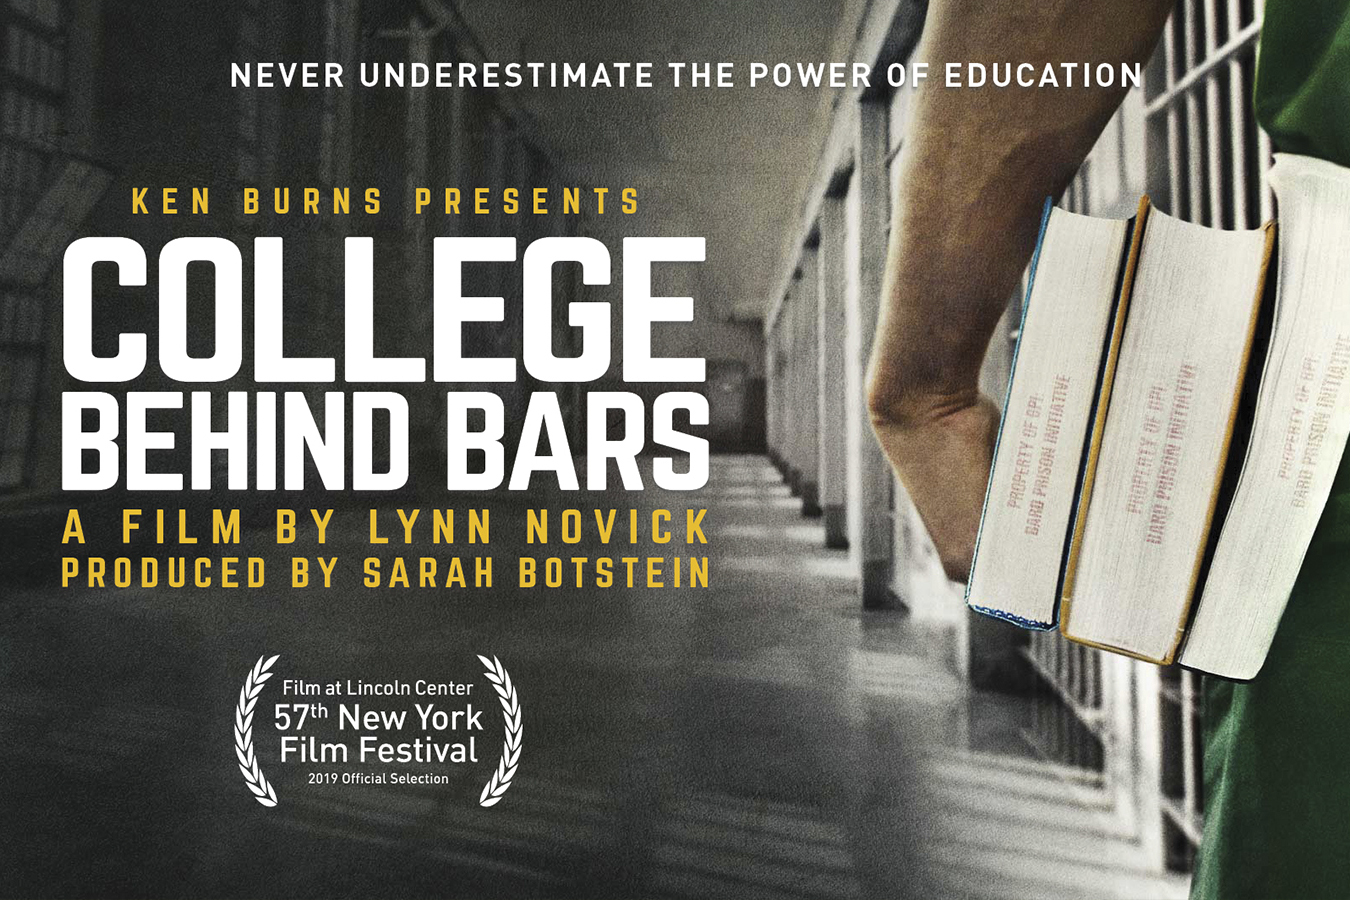 Special Preview of the New Documentary College Behind Bars